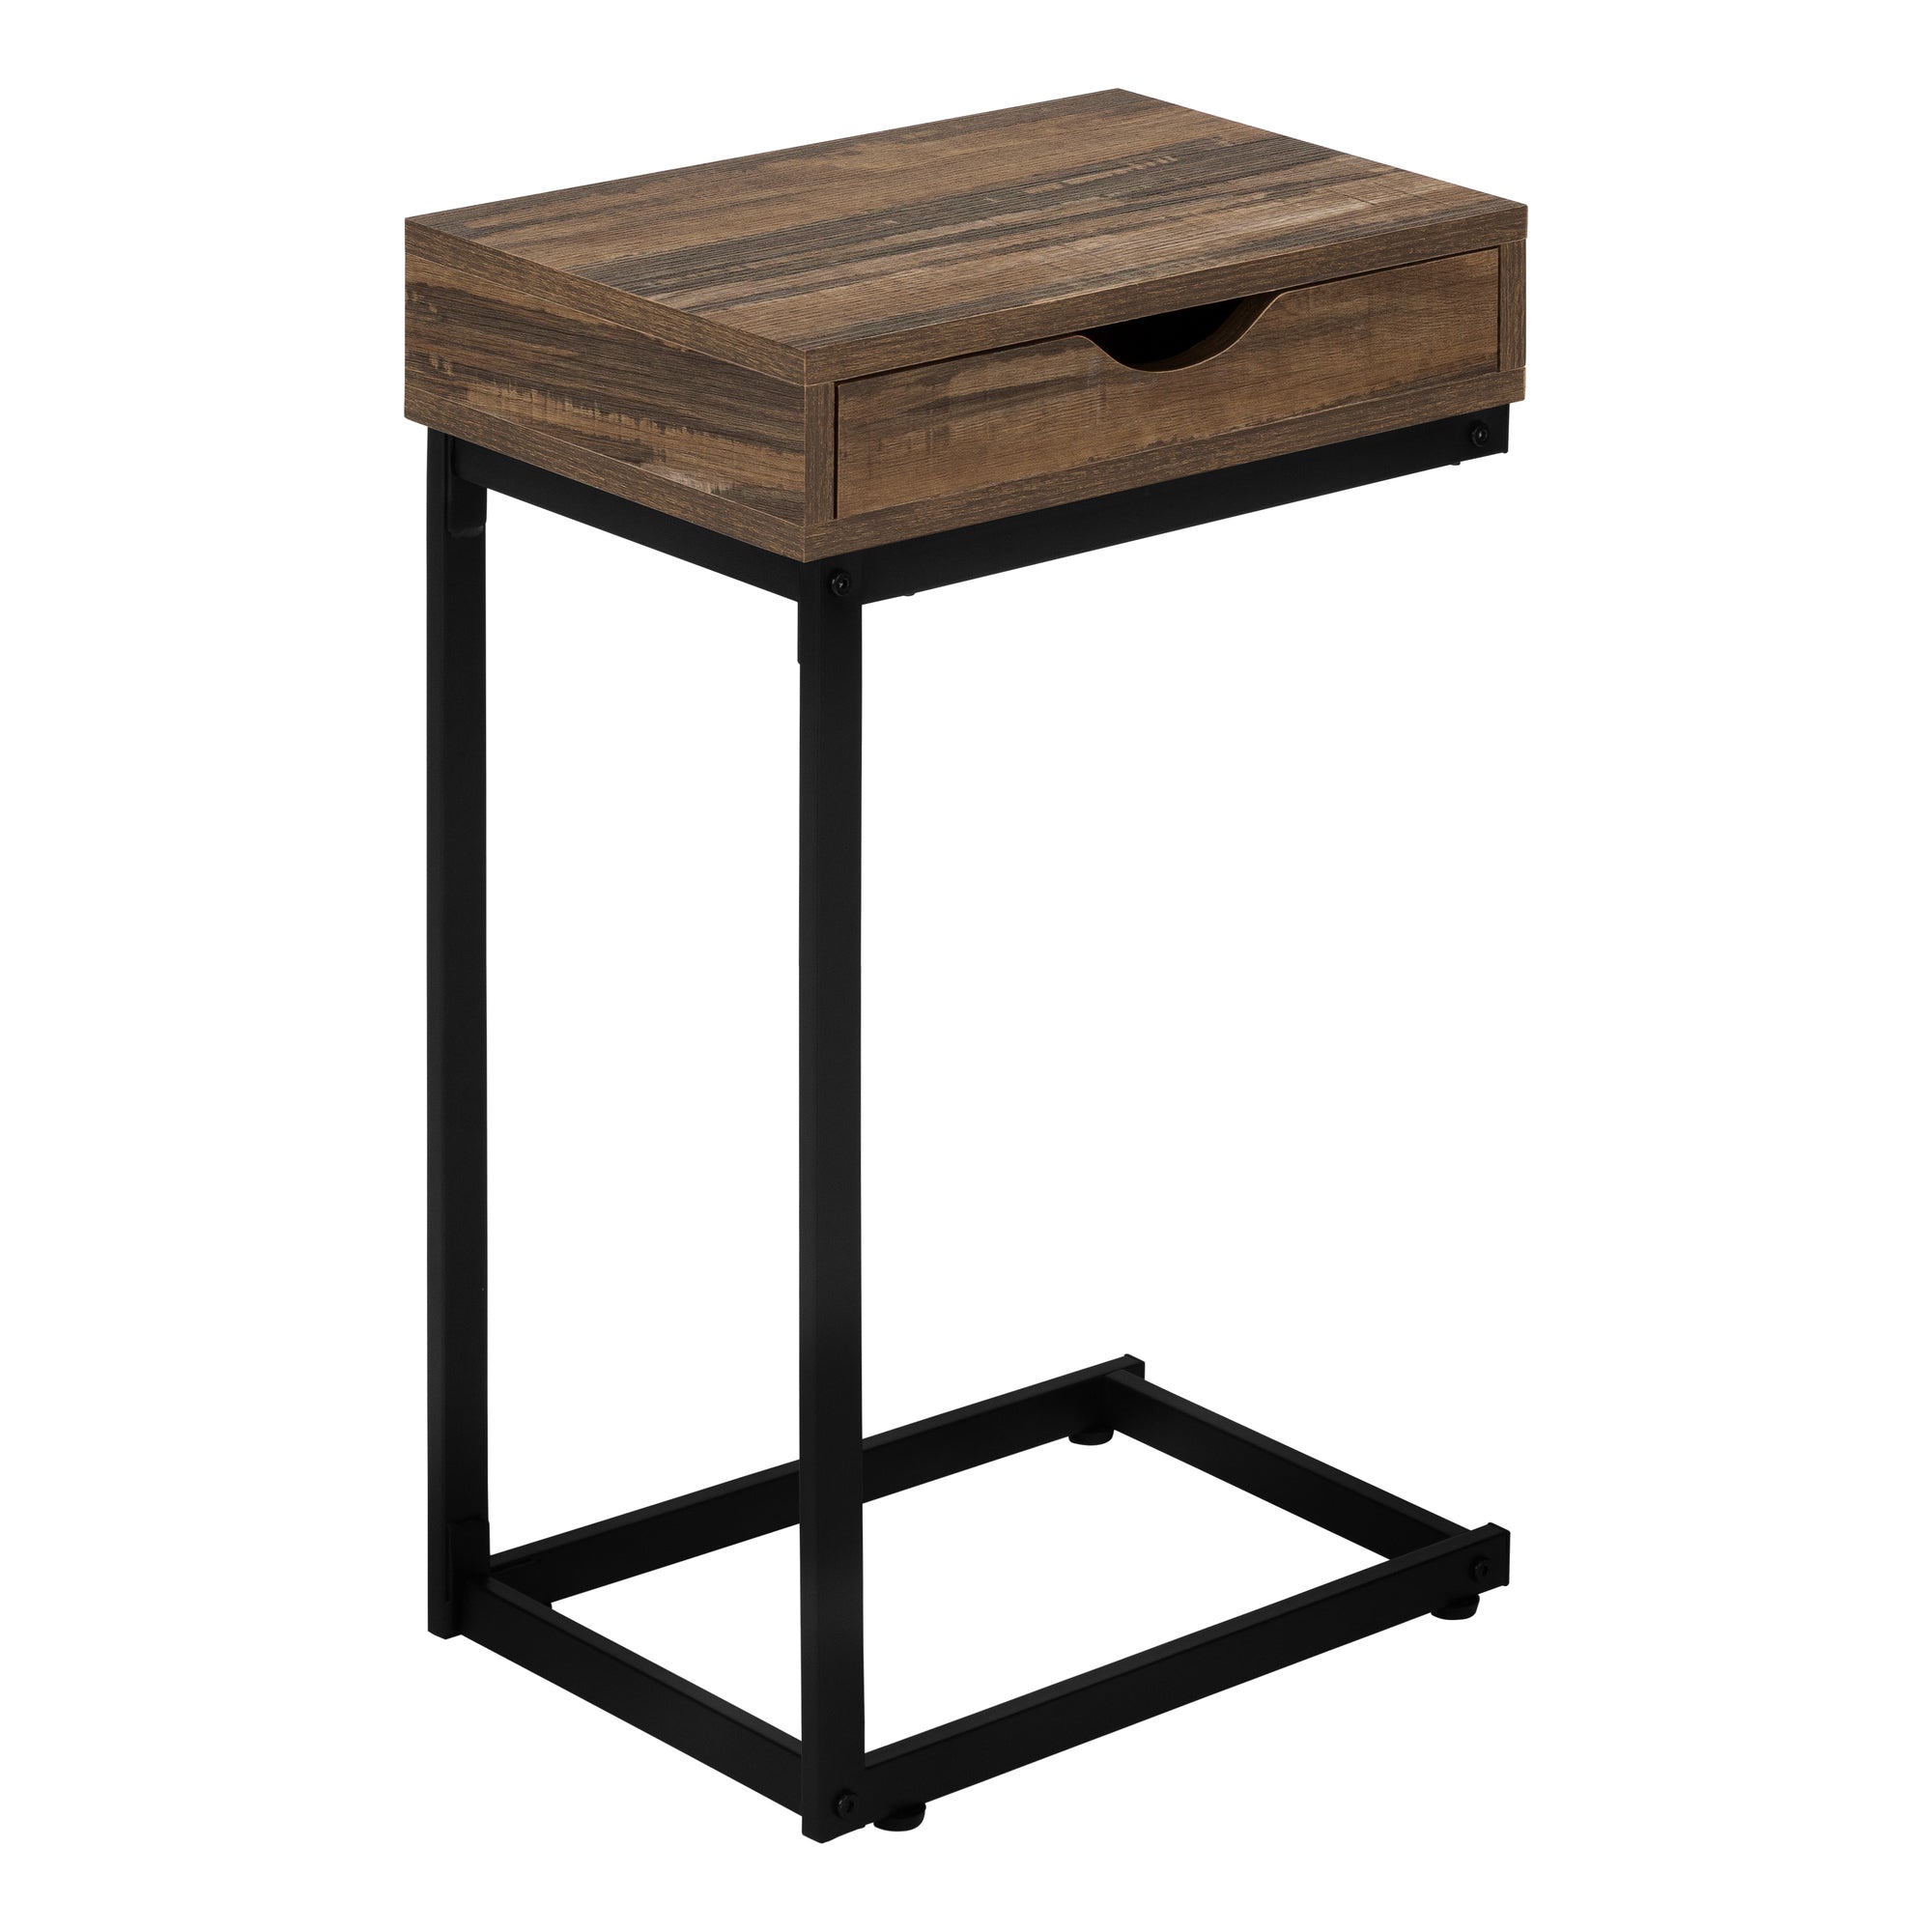 MN-603602    Accent Table, C-Shaped, End, Side, Snack, Living Room, Bedroom, Storage Drawer, Metal Frame, Laminate, Brown Reclaimed Wood Look, Black, Contemporary, Modern